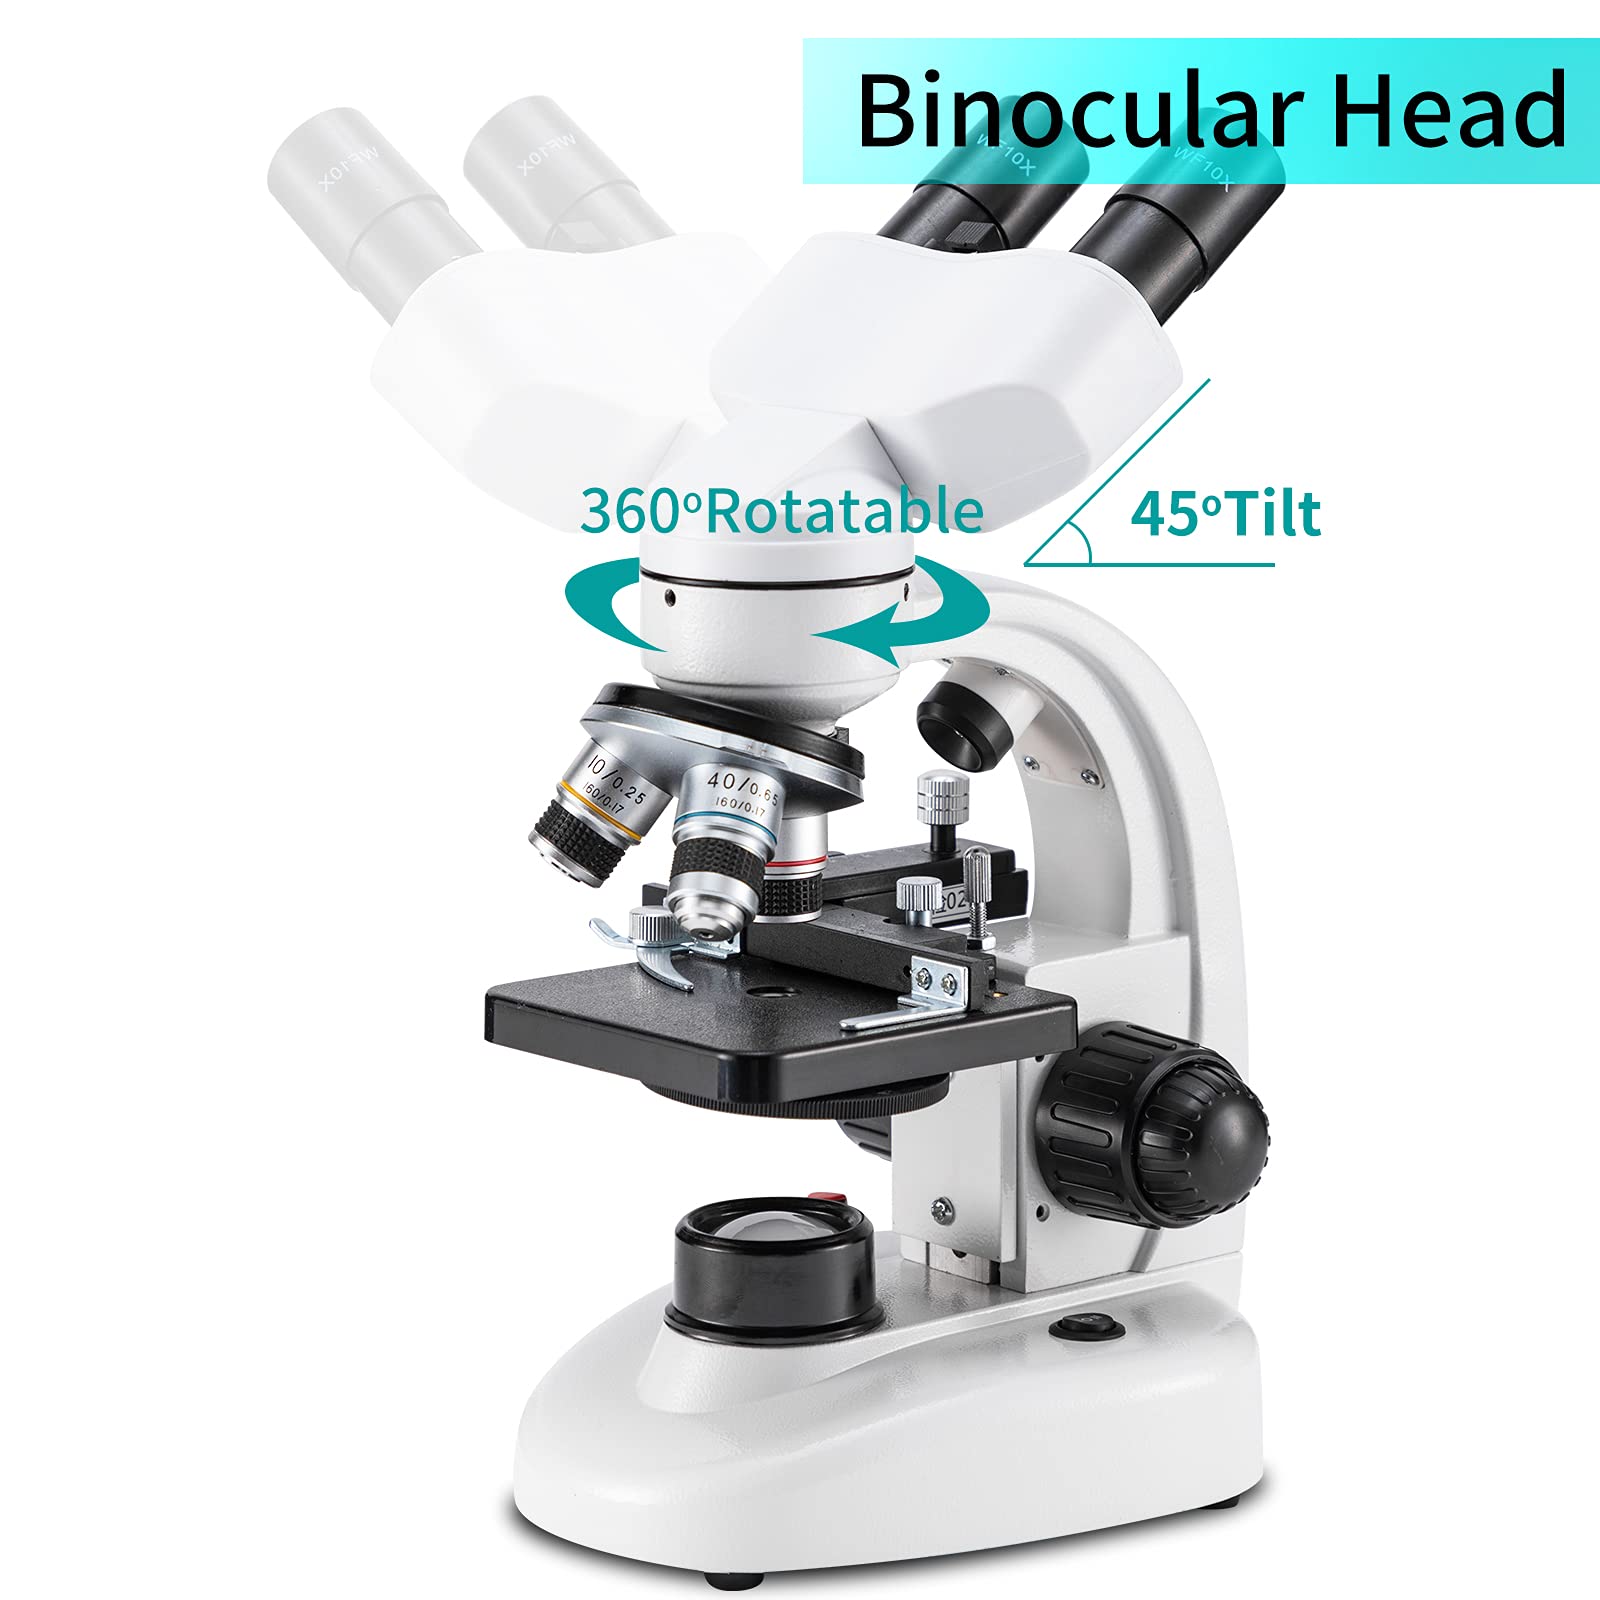 Compound Binocular Microscope,WF10x and WF25x Eyepieces,40X-2000X Magnification, LED Illumination Two-Layer Mechanical Stage,Microscope for Adults…